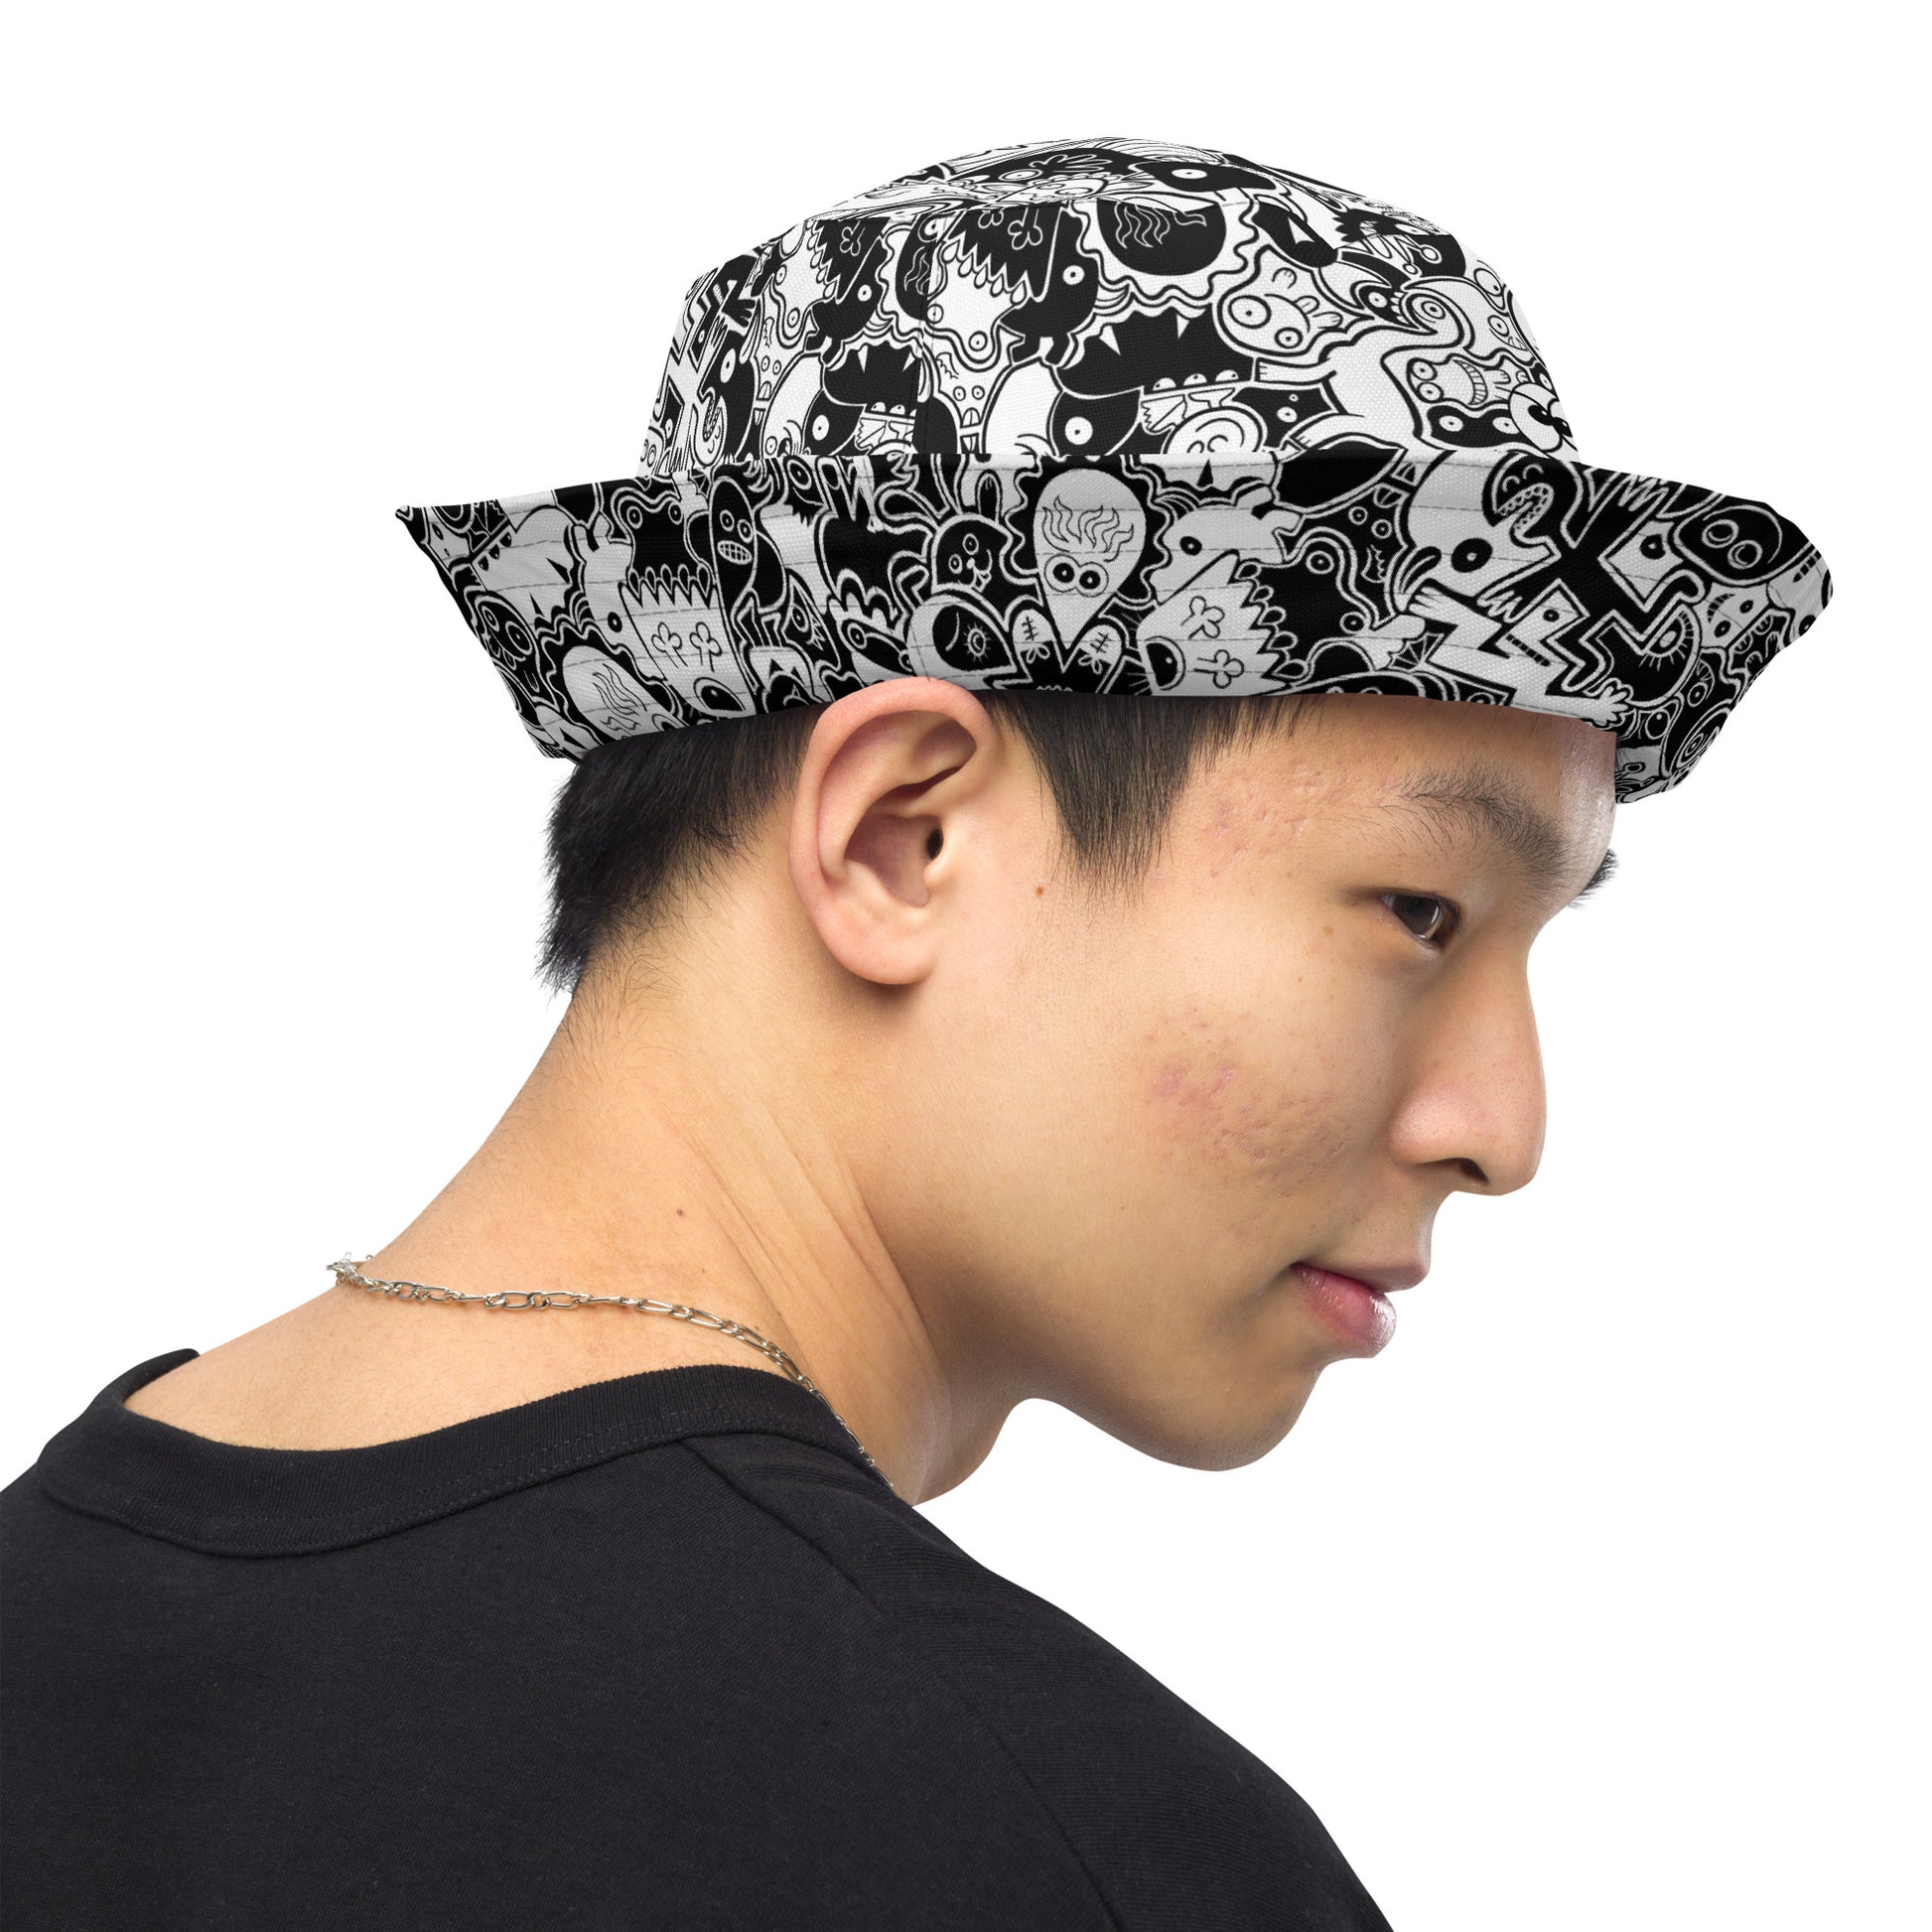 Joyful crowd of black and white doodle creatures Reversible bucket hat. Outside view